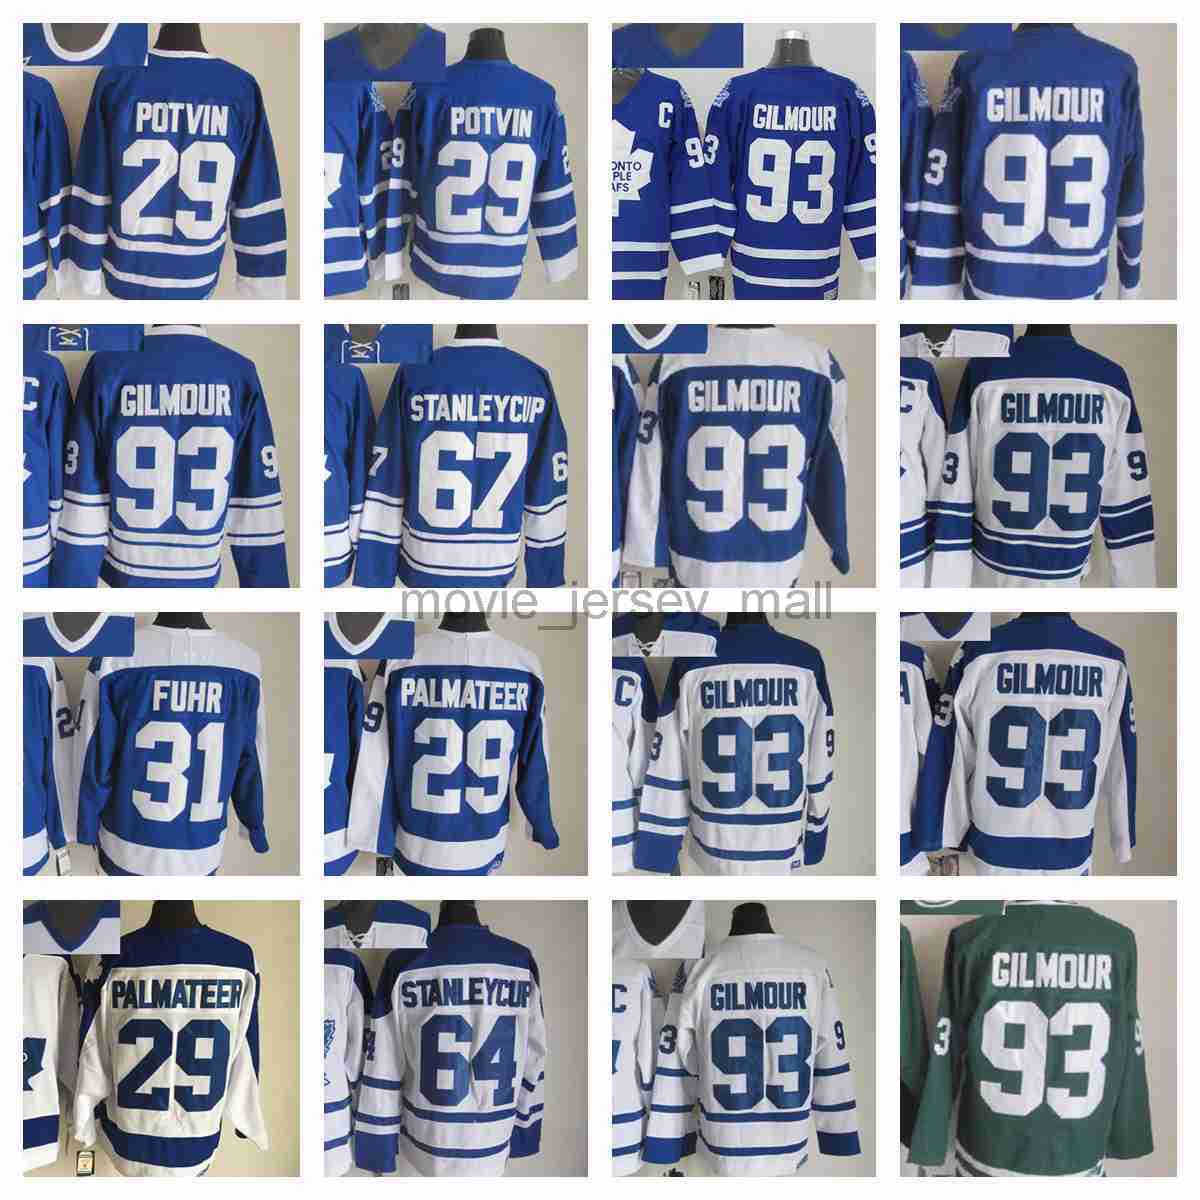 

Toronto Maple''Leafs''New Retro Ice Hockey Jerseys 93 Doug Gilmour 64 Stanleycup 29 Felix Potvin 31 Grant Fuhr Stitched Jersey, Same as picture (with team name)